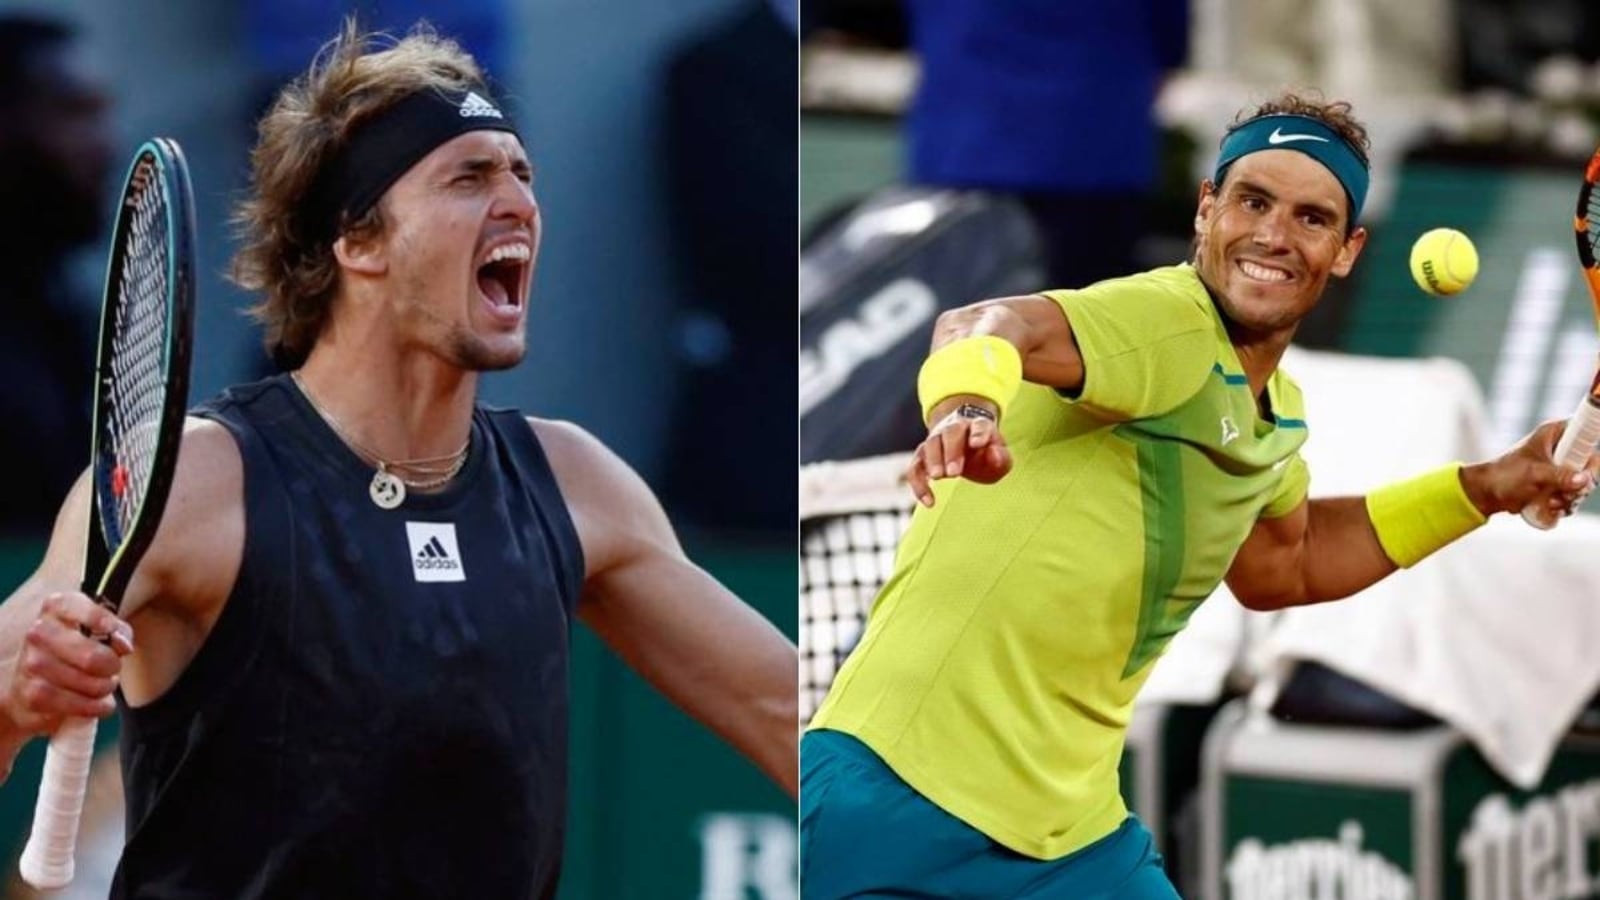 French Open 2022 semi-final, Nadal vs Zverev Head-to-head record and key stats Tennis News